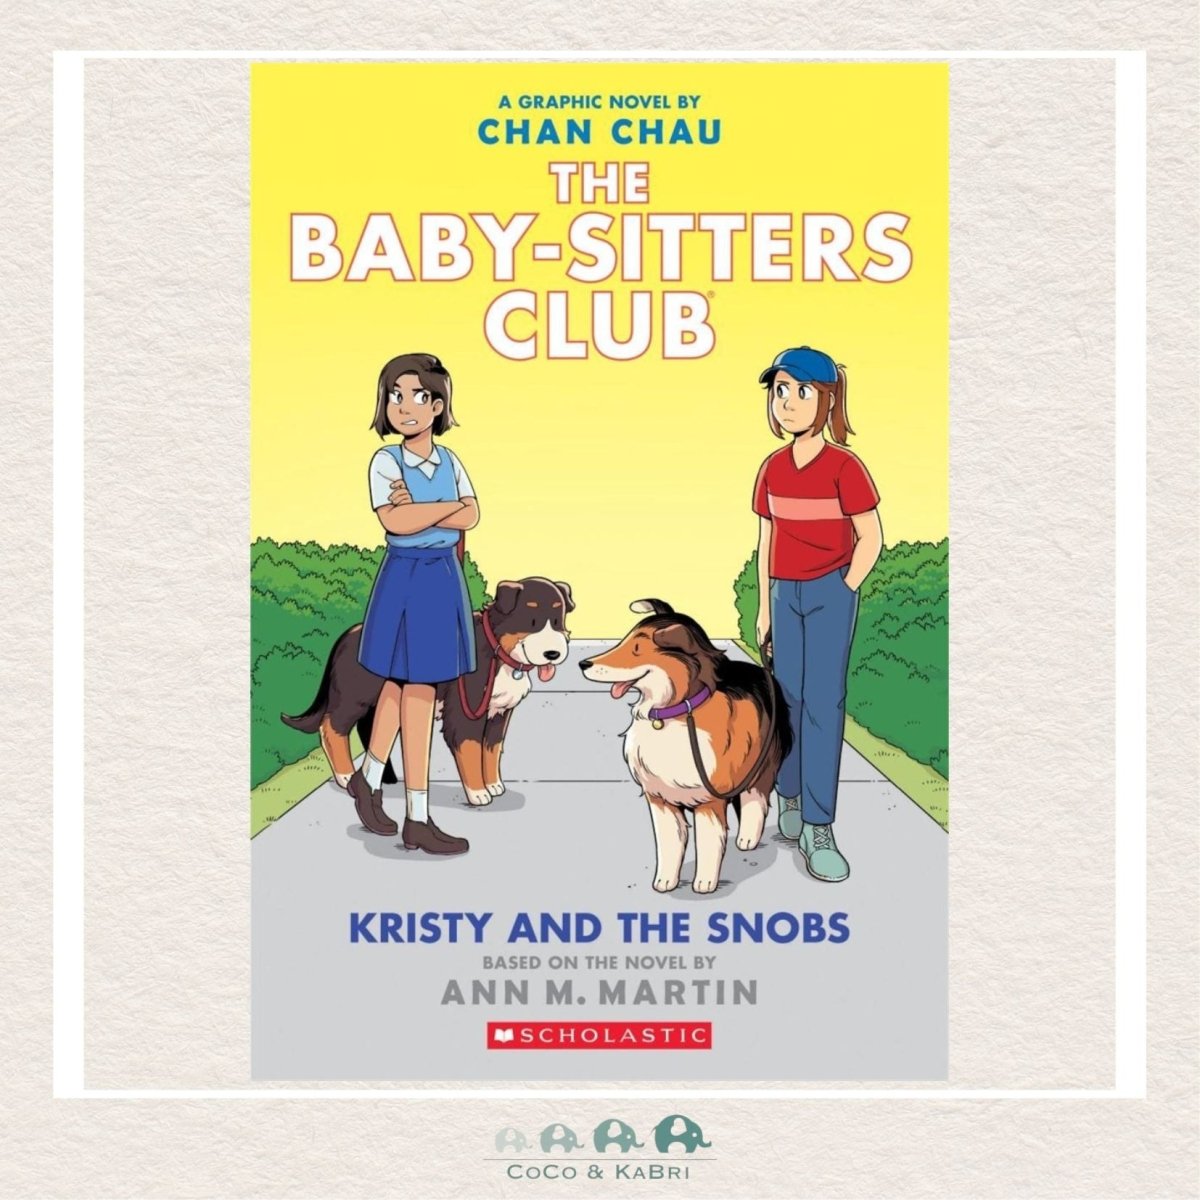 Kristy and the Snobs: A Graphic Novel (The Baby-Sitters Club #10), CoCo & KaBri Children's Boutique